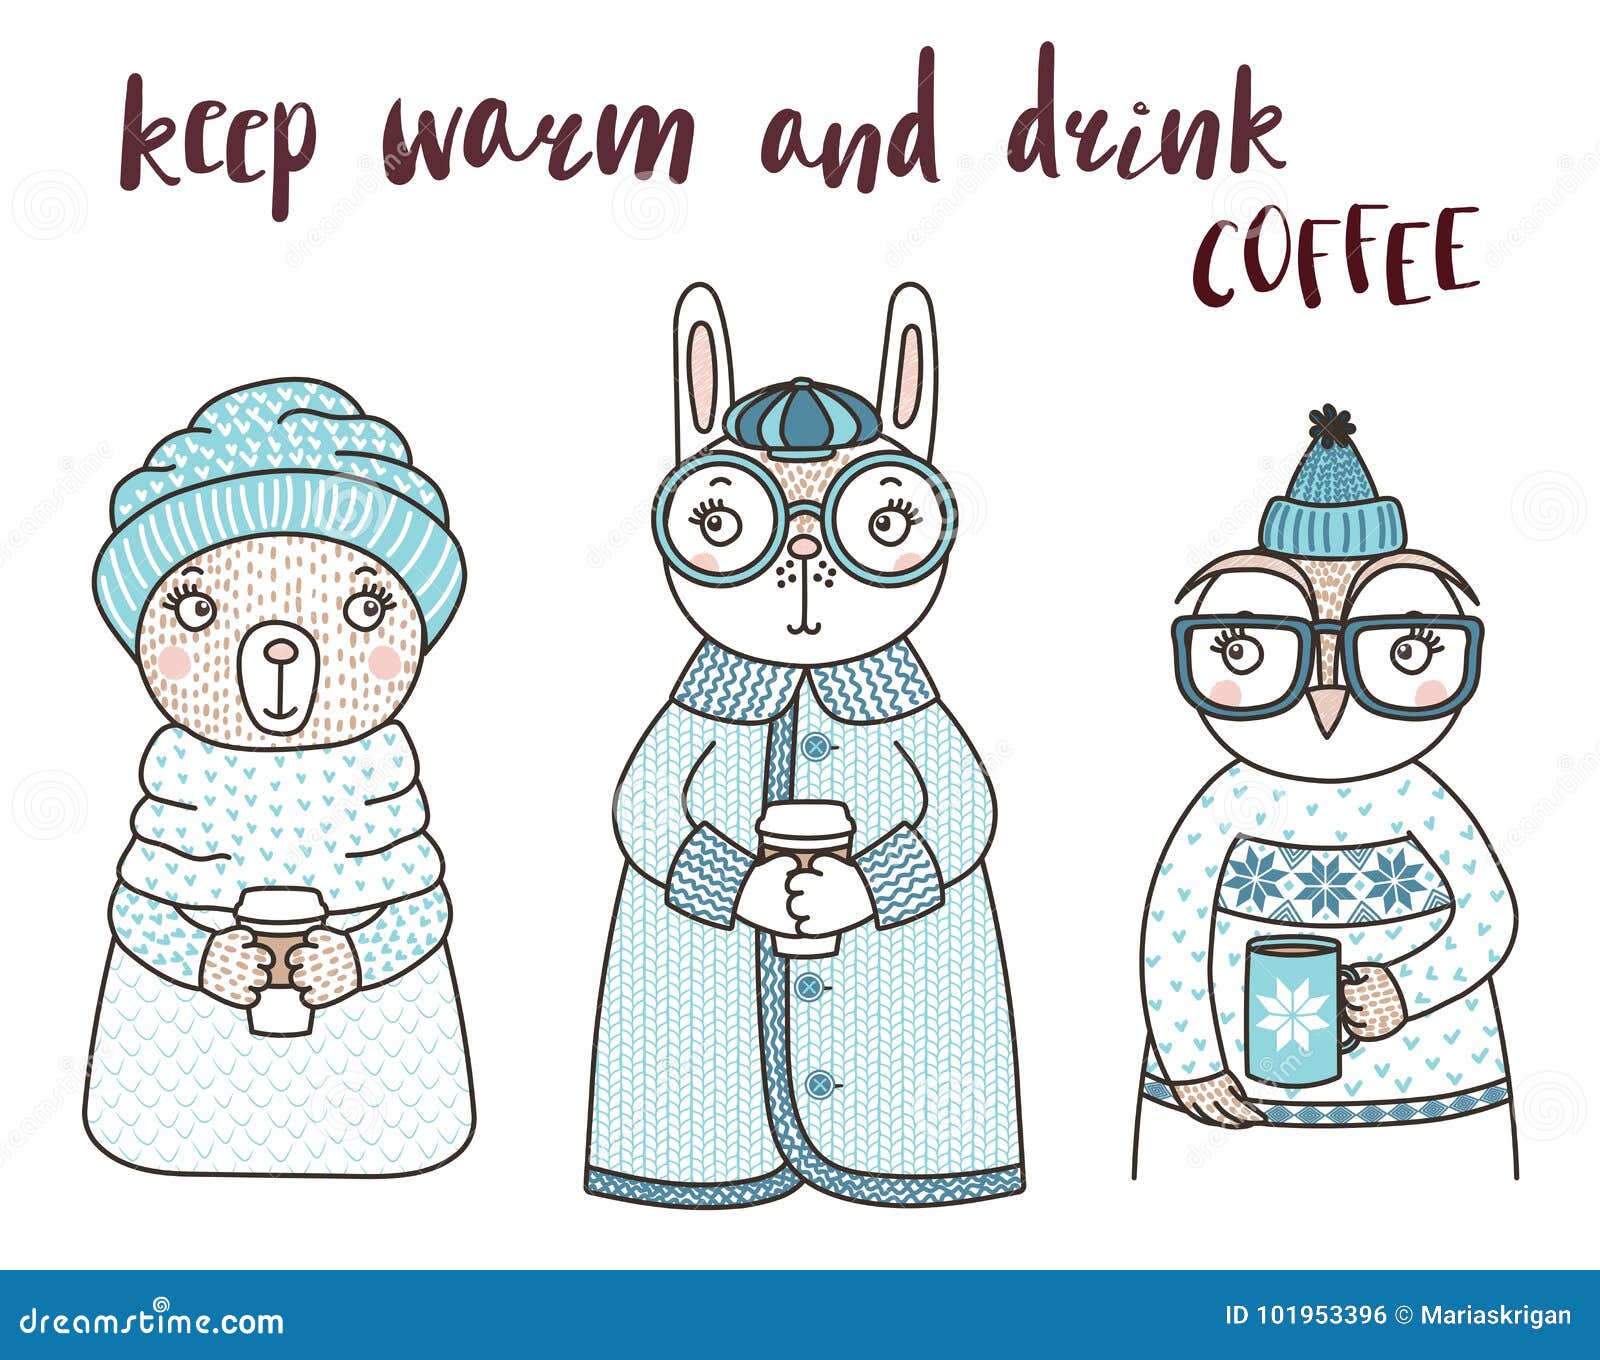 https://thumbs.dreamstime.com/z/hand-drawn-vector-illustration-cute-funny-rabbit-owl-bear-knitted-sweaters-holding-cups-text-keep-warm-drink-coffee-101953396.jpg